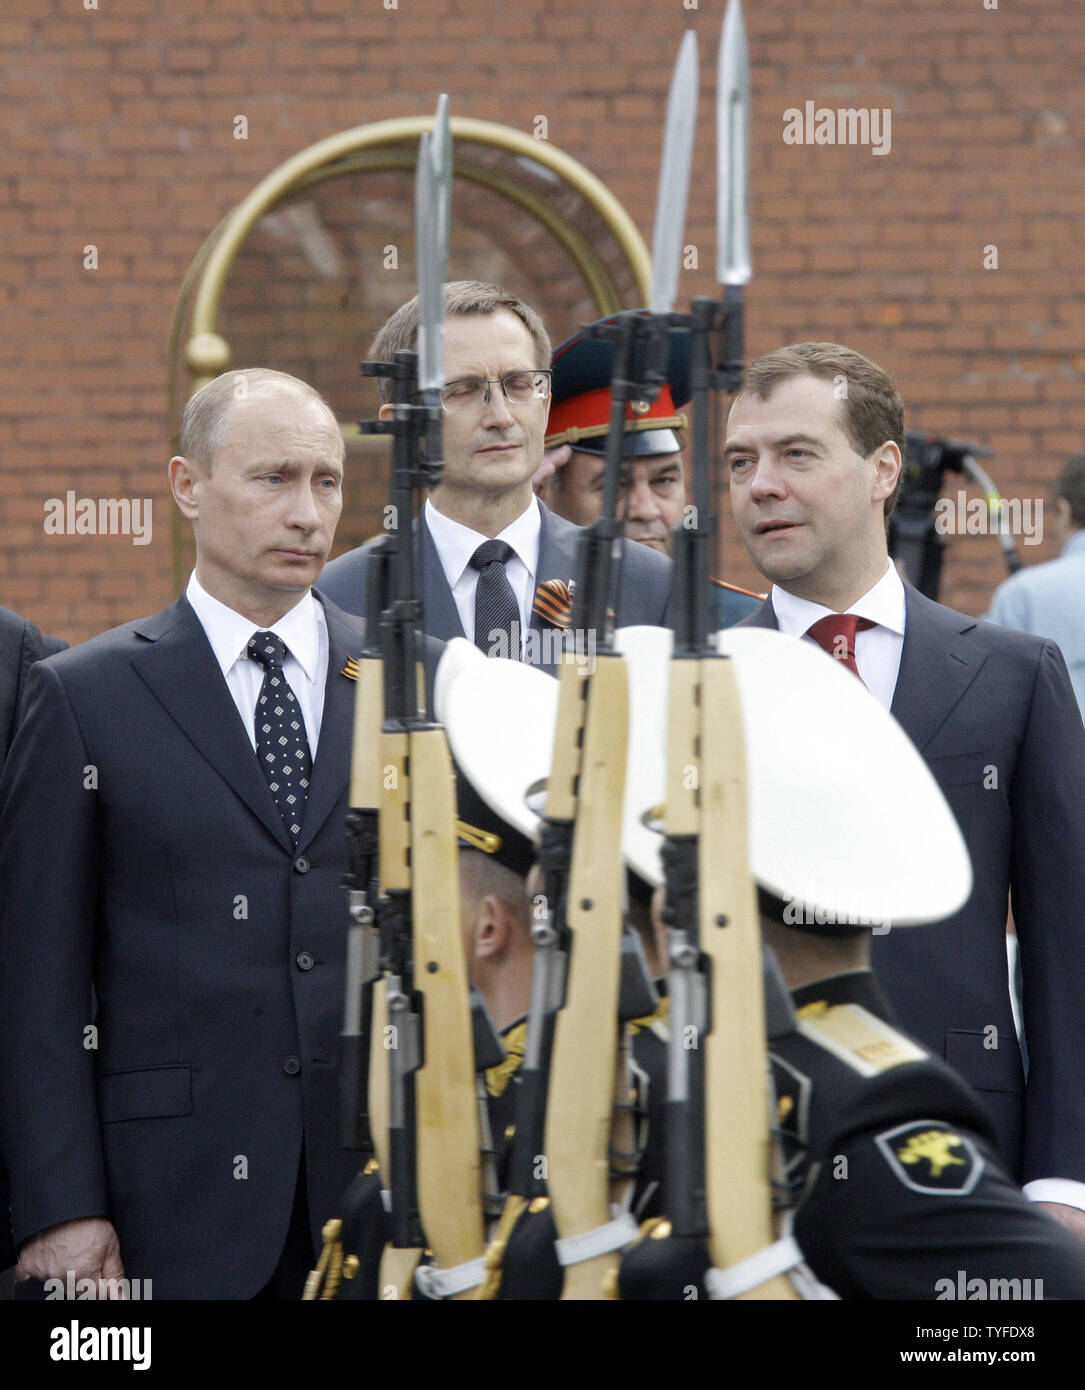 Russian President Dmitry Medvedev (R) and Prime Minister Vladimir Putin (L) review the troops during a wreath laying ceremony at the Tomb of the Unknown Soldier in Moscow on May 8, 2009 on the eve of the Victory Day. On Saturday, May 9 Russia will celebrate the 64th anniversary of the World War Two victory over Nazi Germany. (UPI Photo/Anatoli Zhdanov) Stock Photo